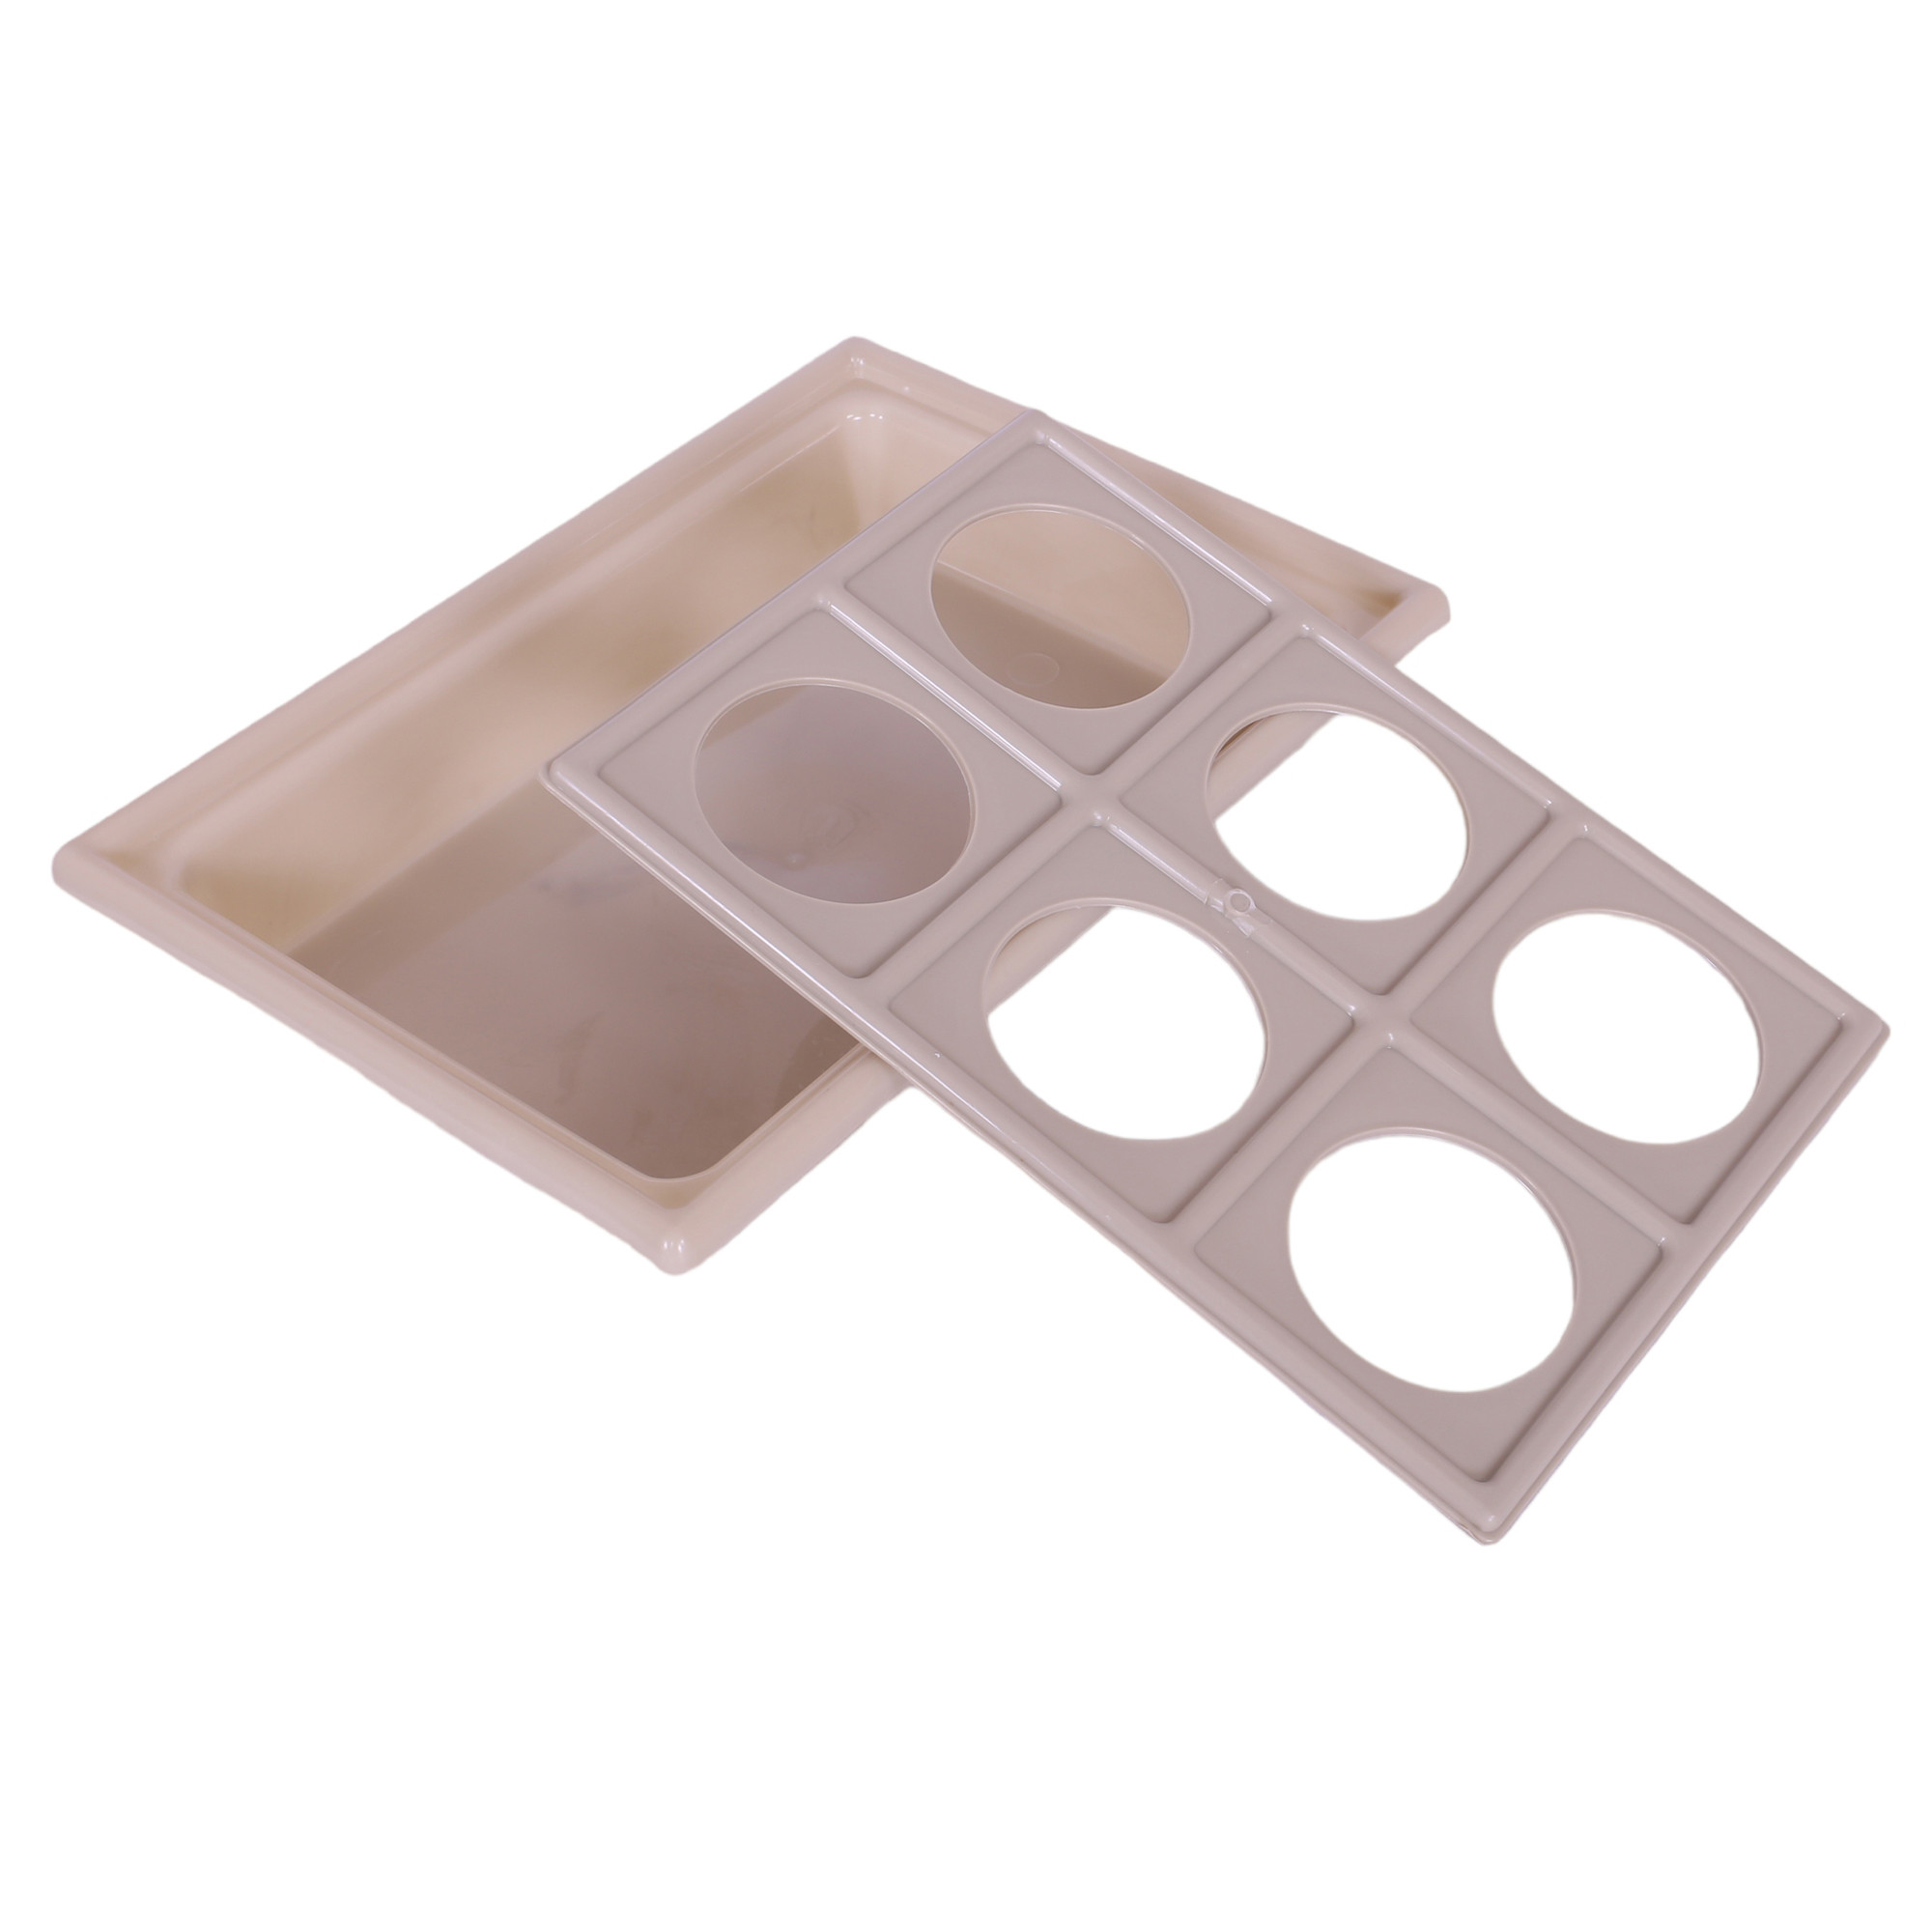 Kuber Industries Glass Tray | Plastic Glass Holder | Tray with Cutout Handles | Glass Serving Tray | Glass Holder Tray for Seving | Kitchen Serving Tray | Beige